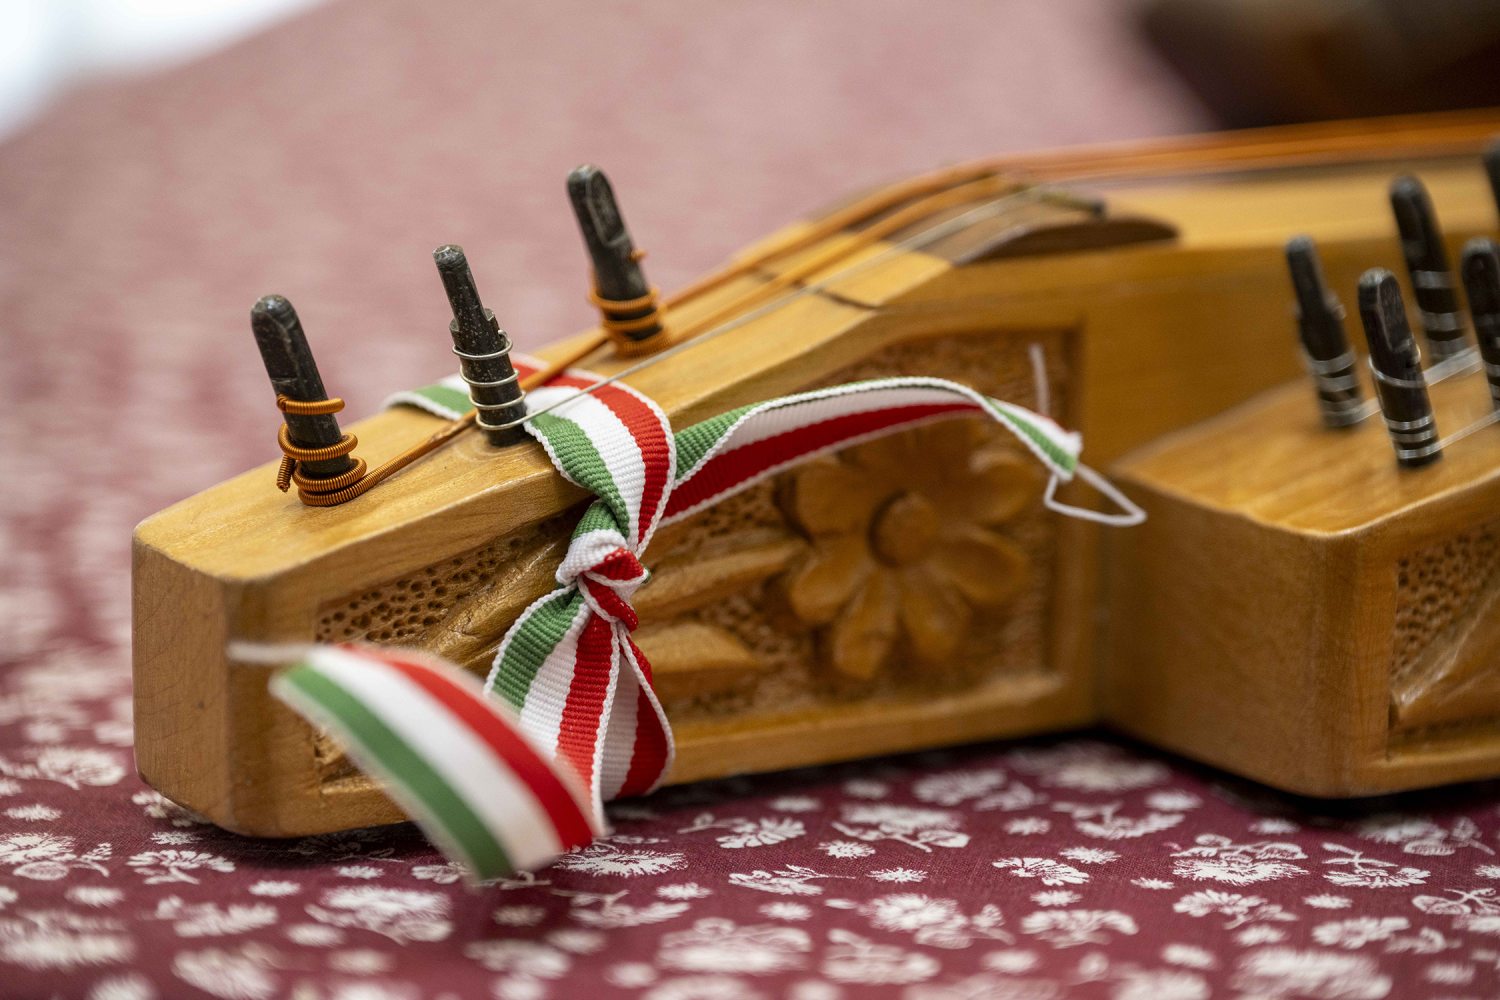 A Hungarian musical instrument, the zither